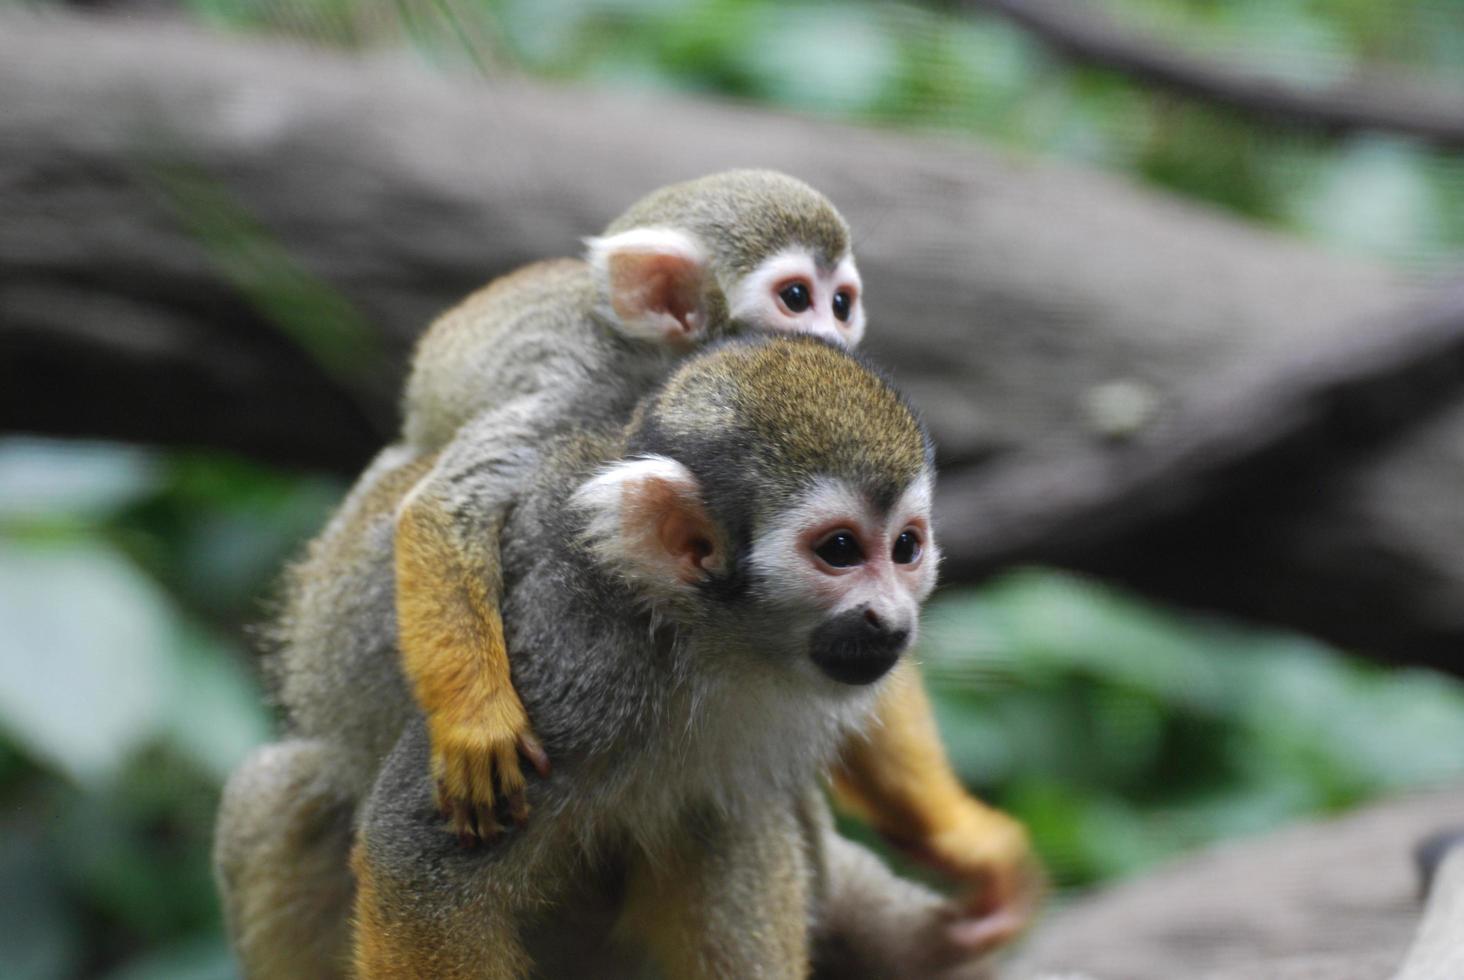 Squirrel Monkey Family with a Baby and Mom photo